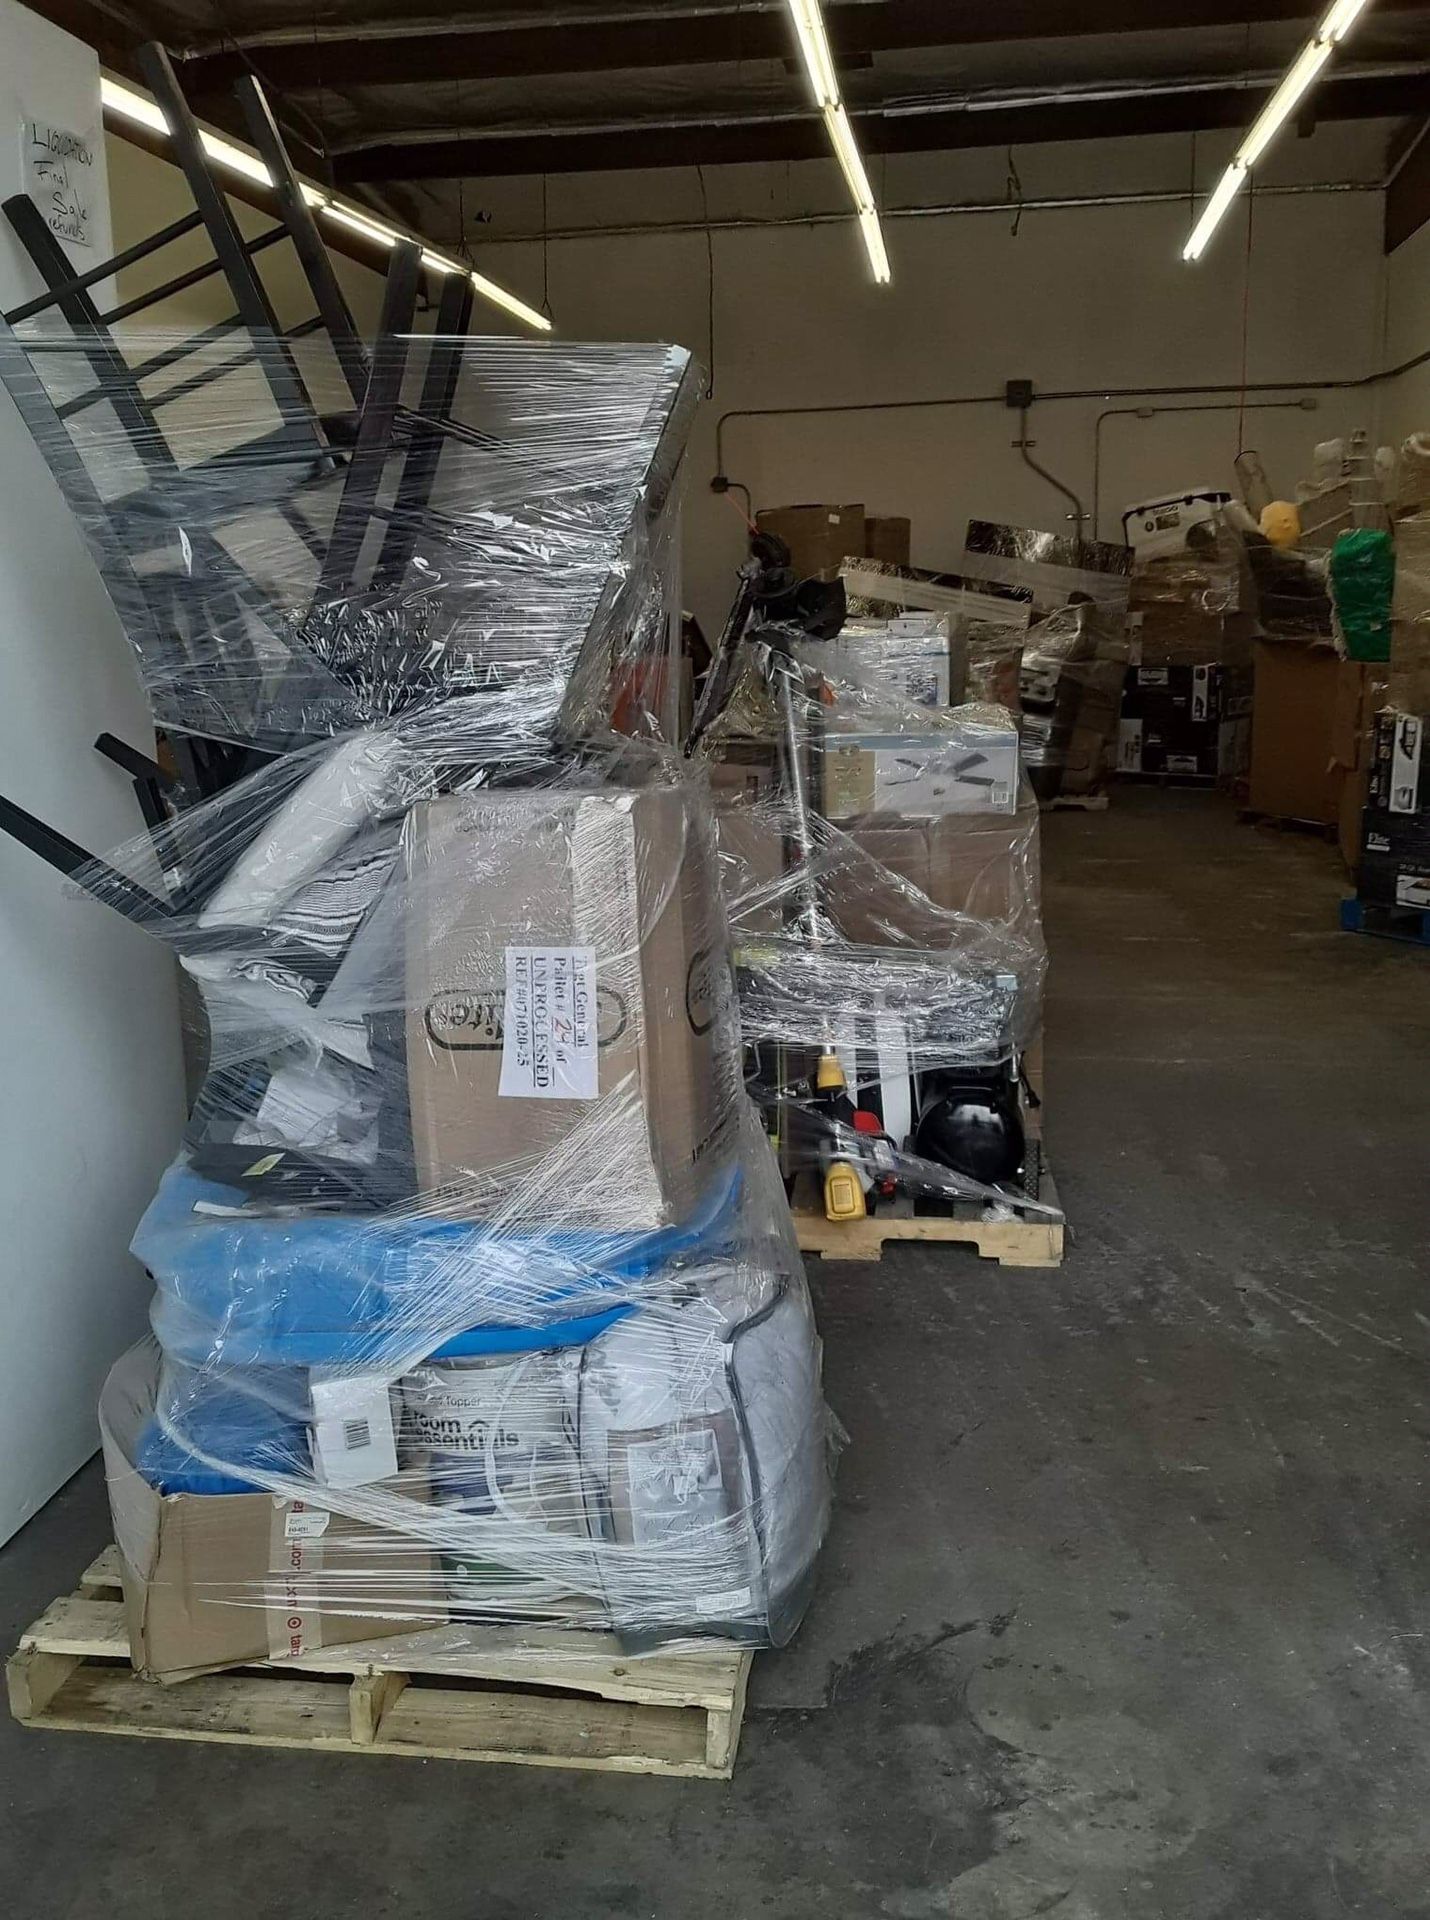 From $450 to $850 pallets!! Target, Home Depot and Amazon!!